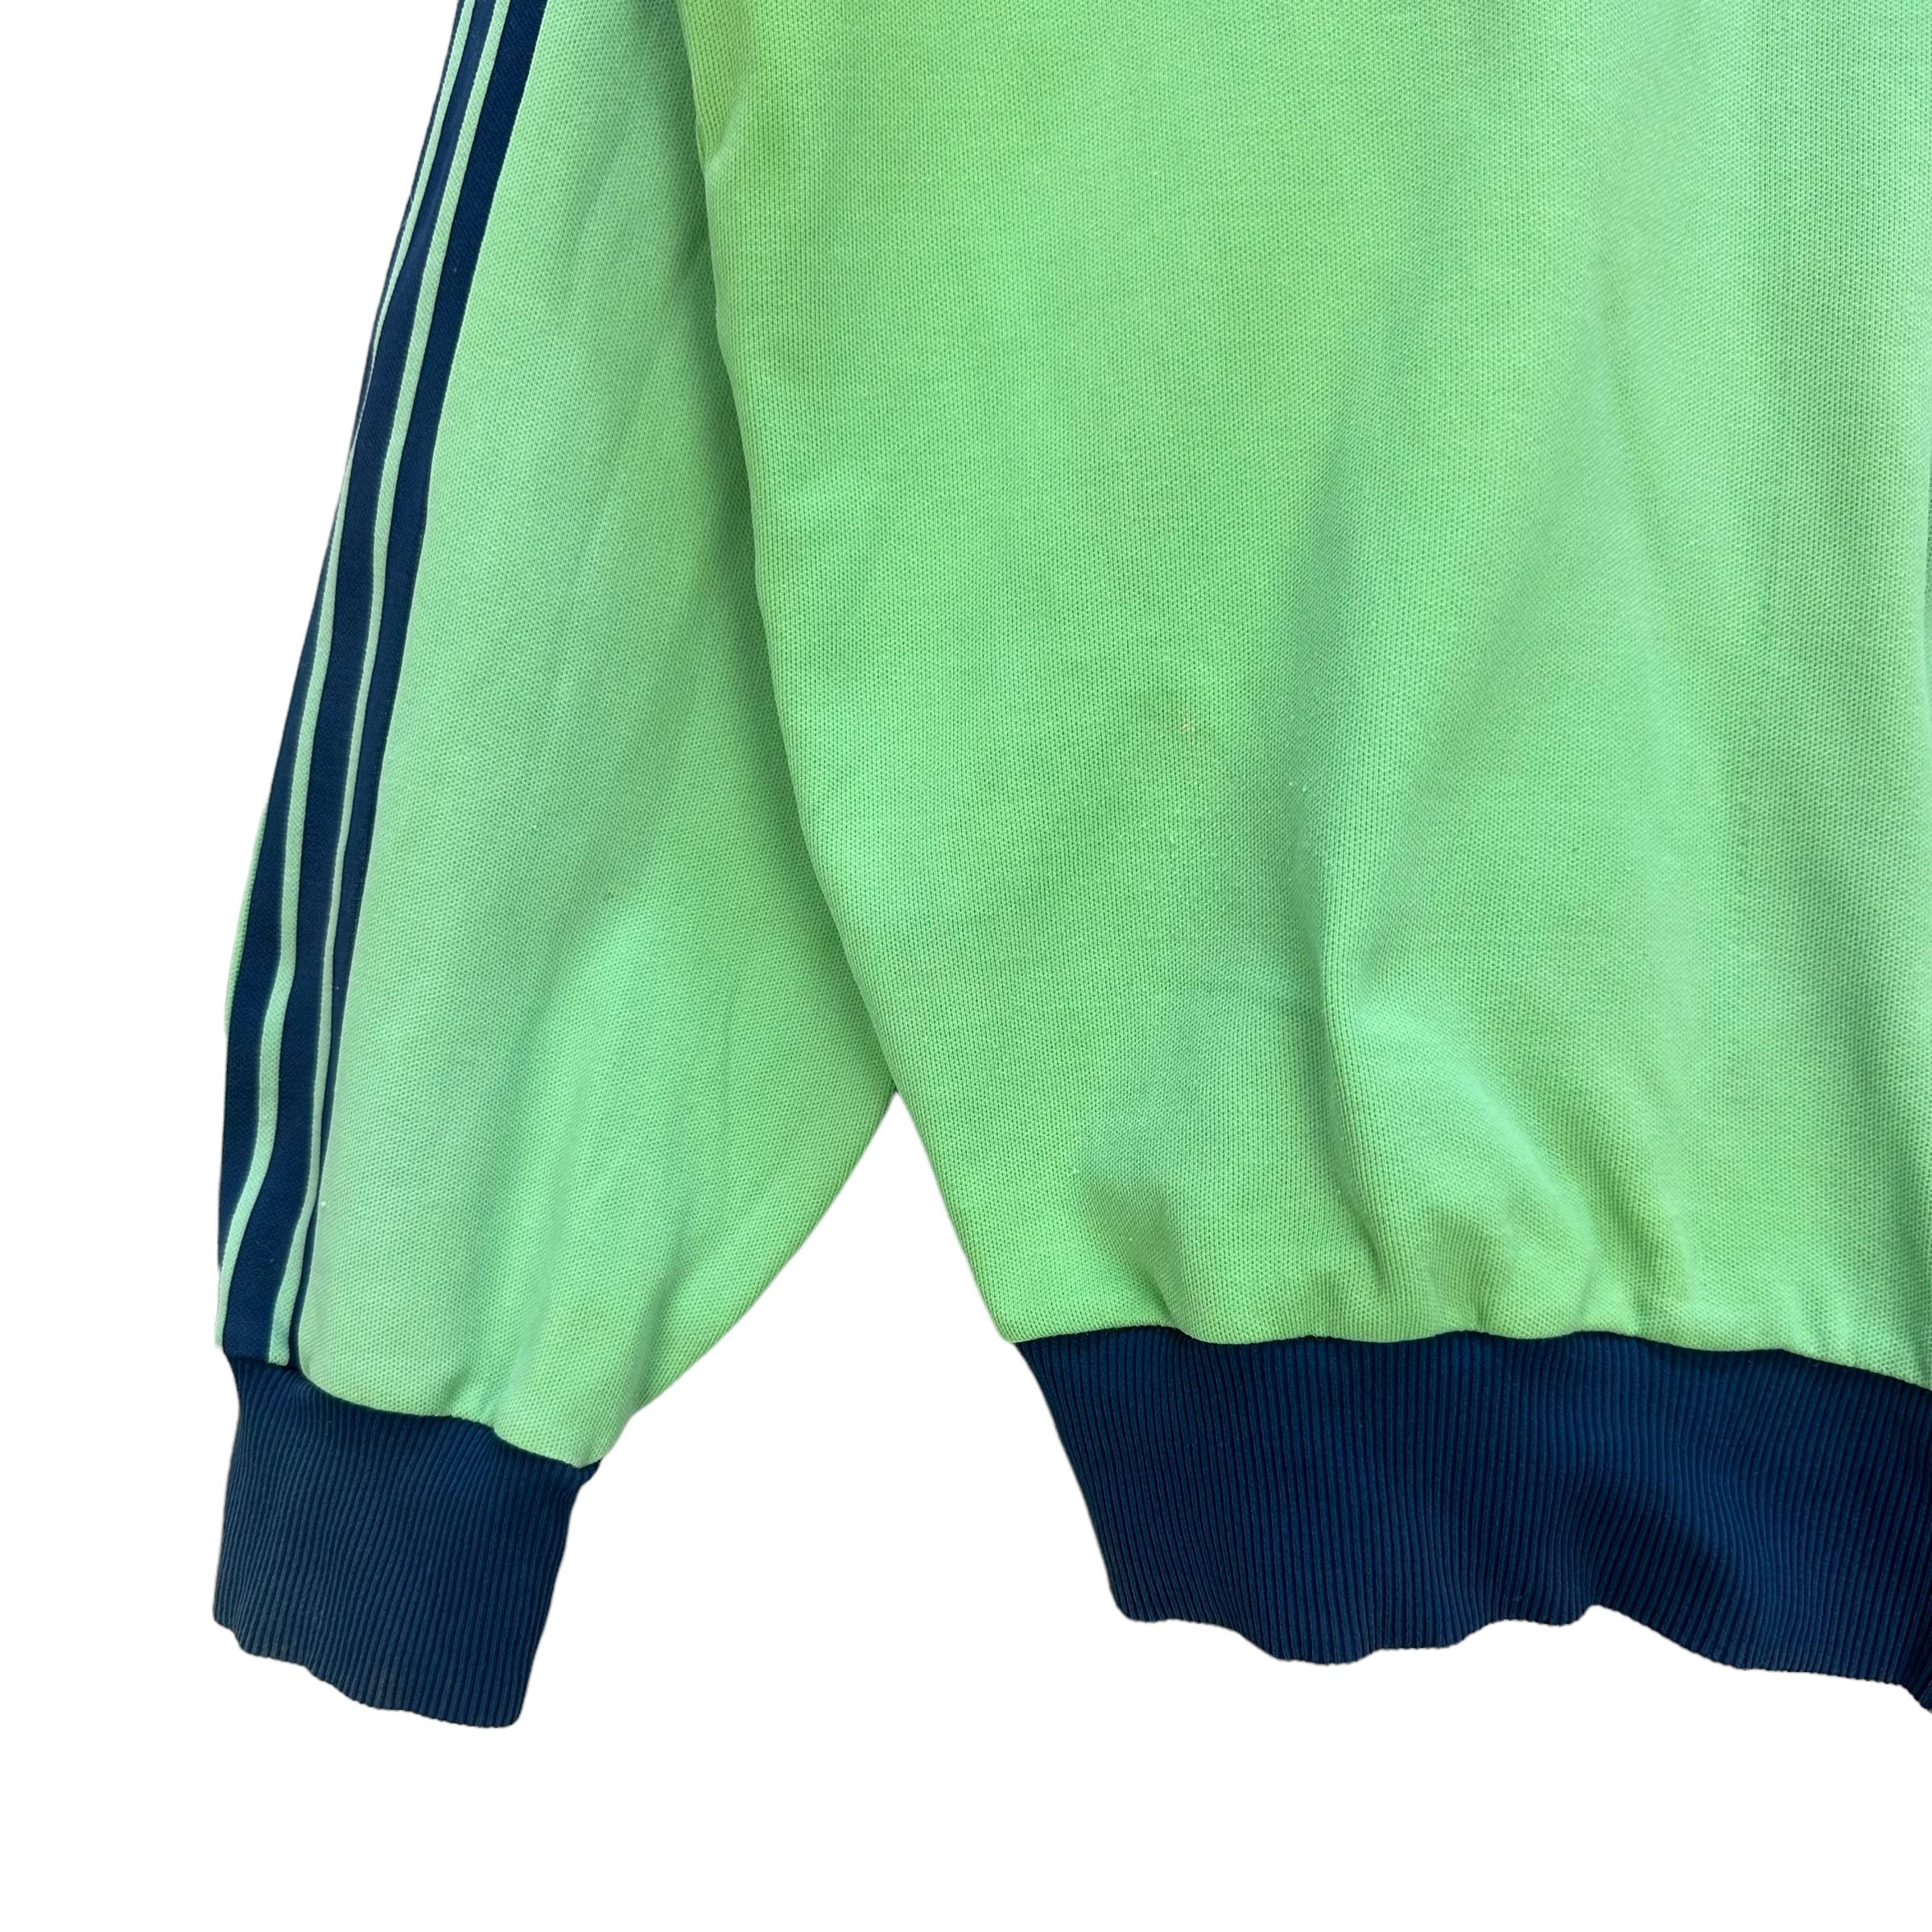 ADIDAS WEST GERMANY GREEN TRACK TOP JACKET #8817-028 - 6